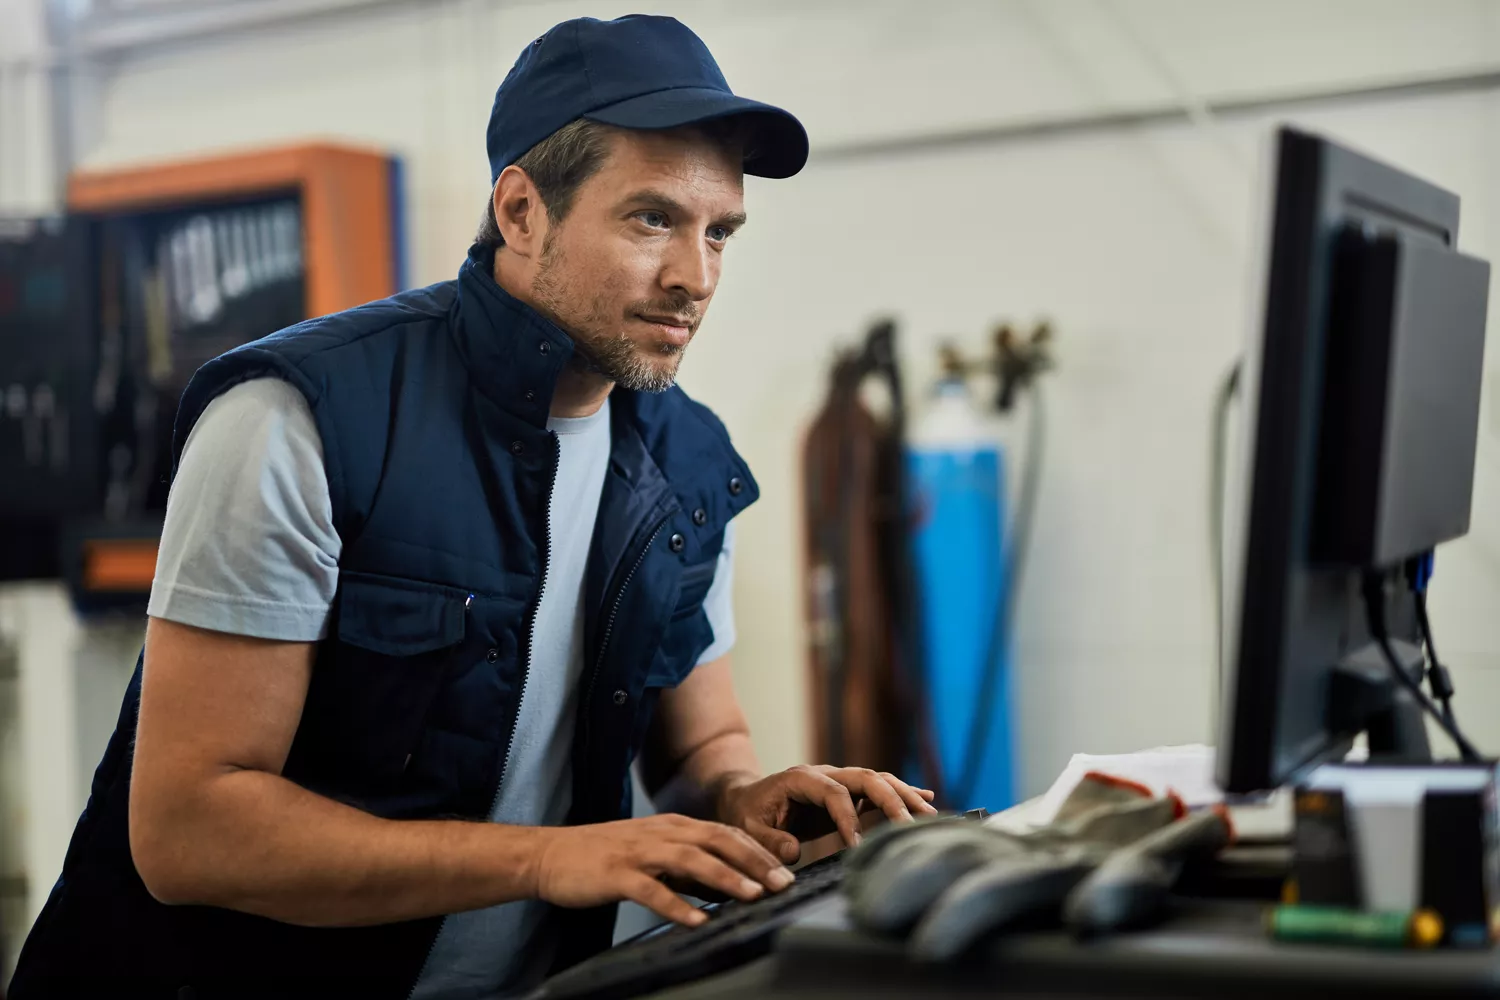 Service employee with blue cap sitting at a computer